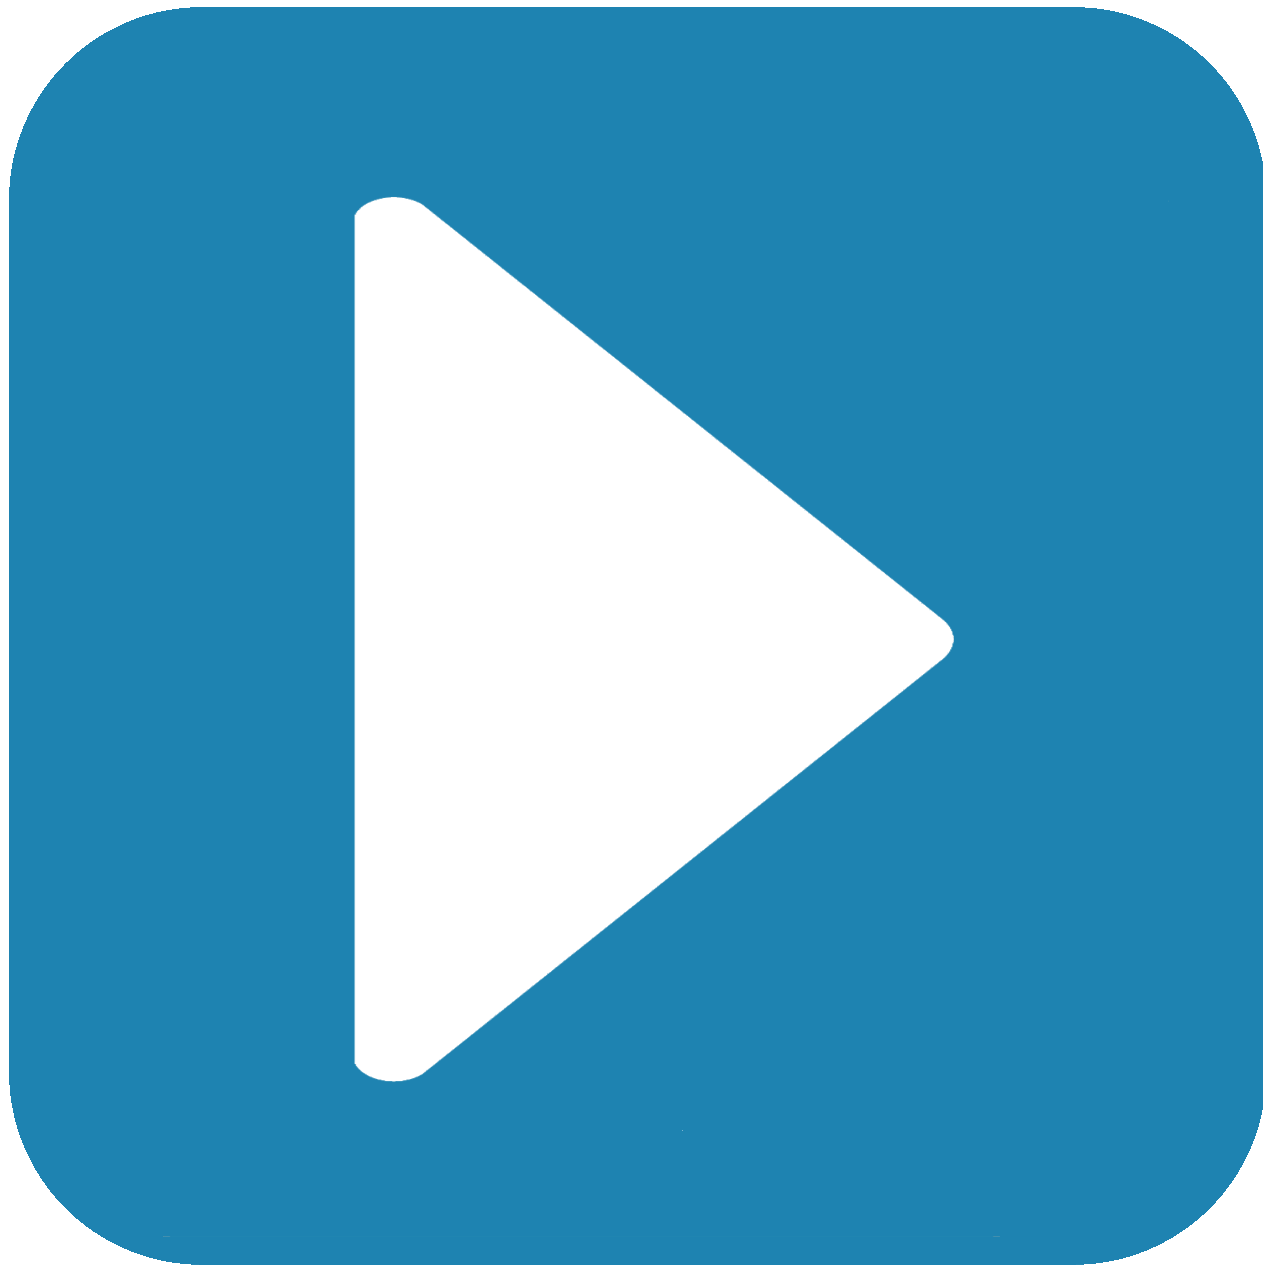 Play-button-blue.png